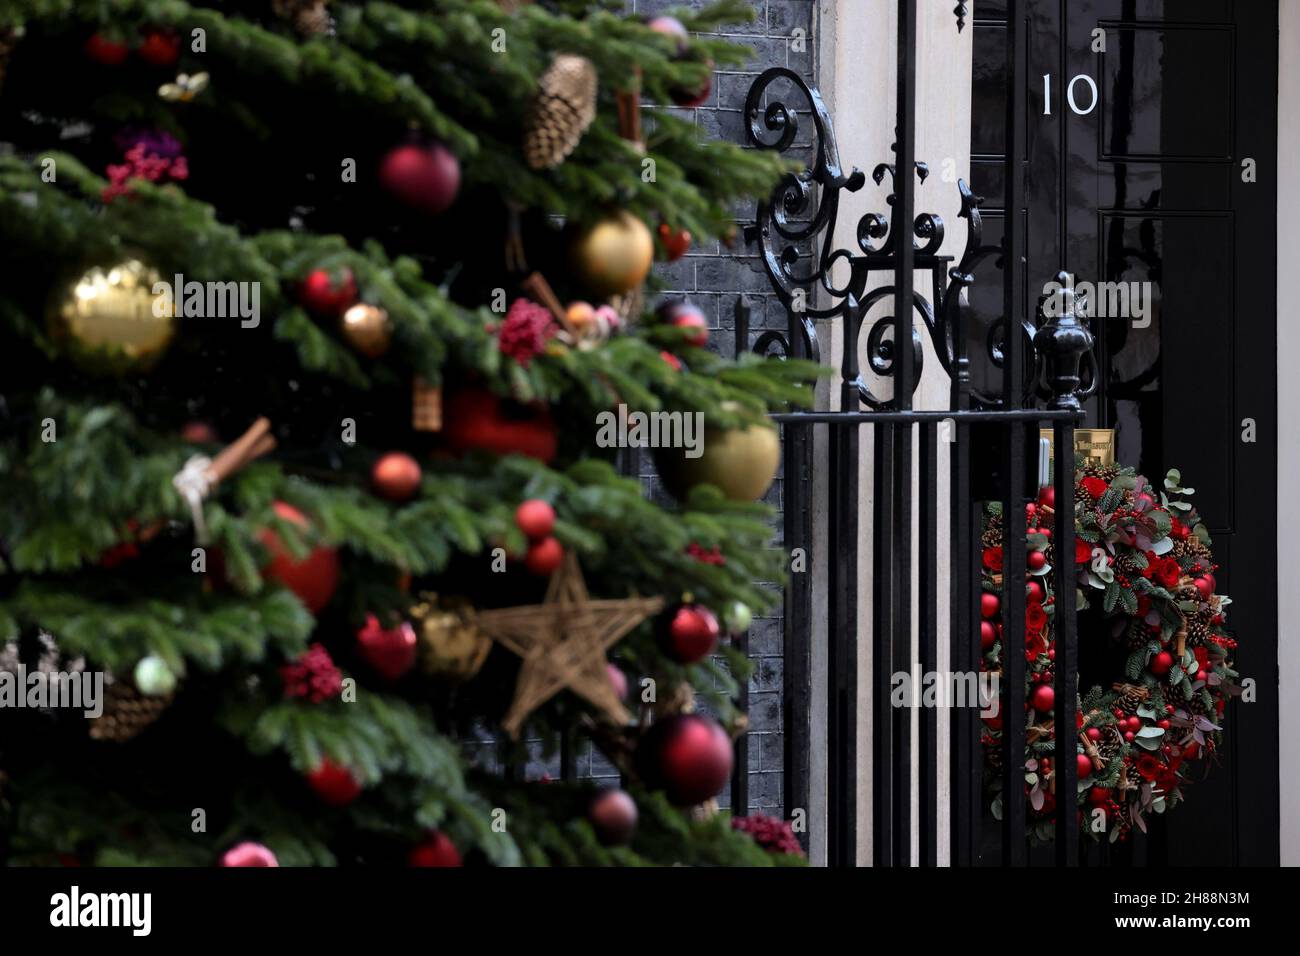 The door of 10 Downing Street is seen decorated with Christmas decorations in London, Britain, November 28, 2021. REUTERS/Tom Nicholson Stock Photo